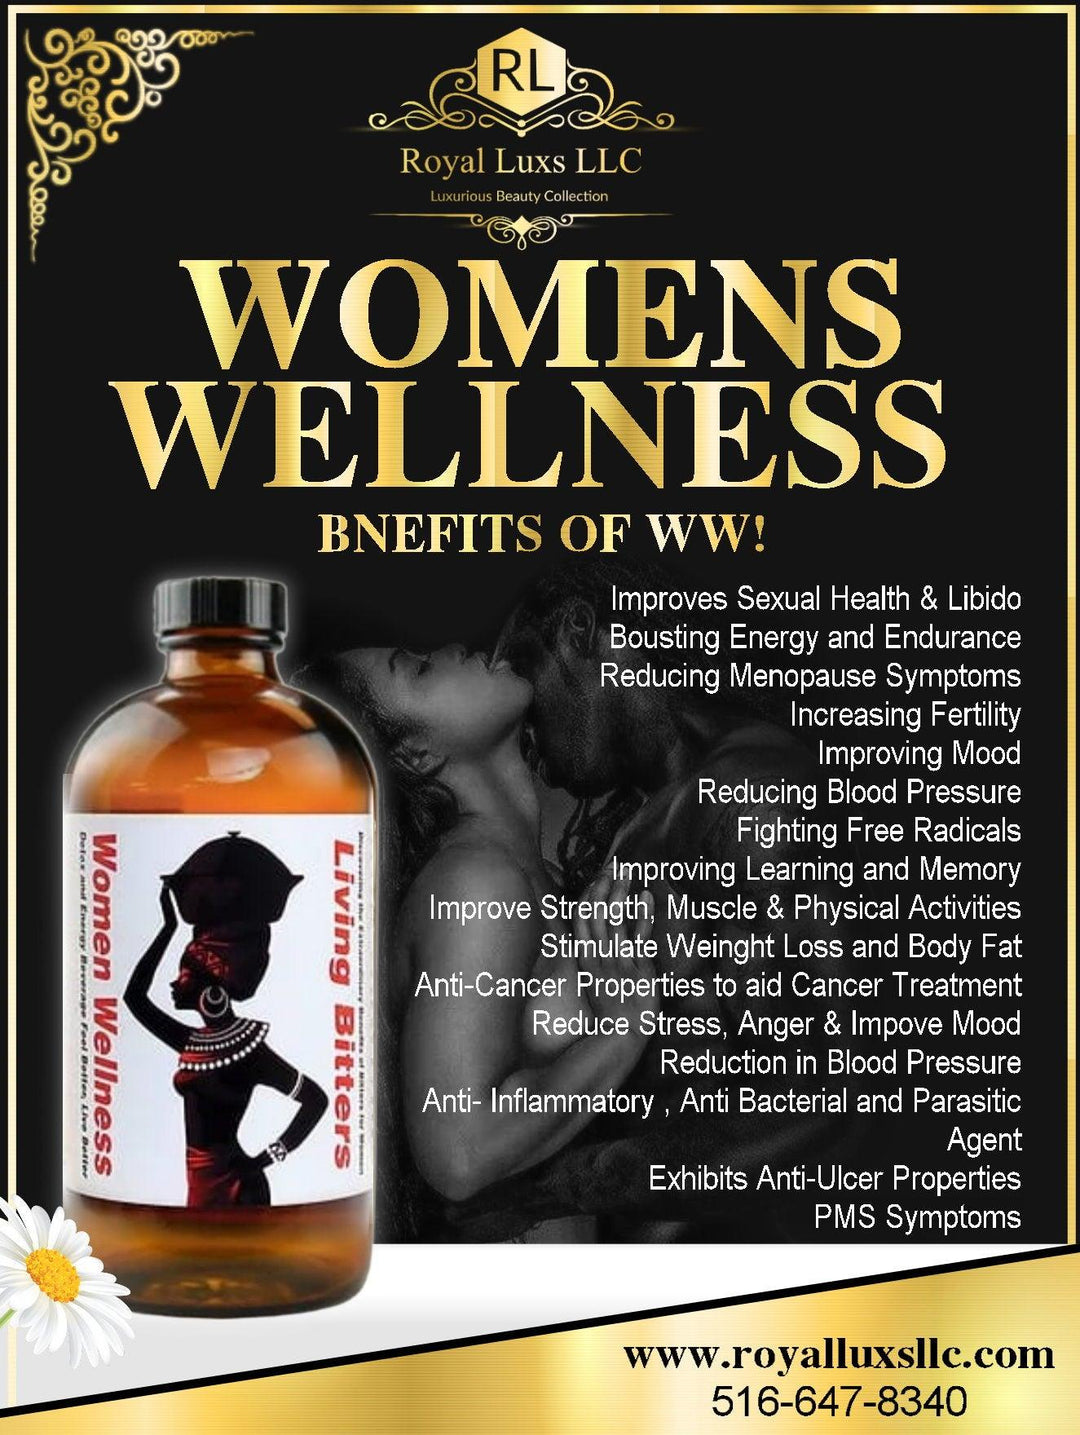 Products for women help boost confidence - RoyalLuxsLLC